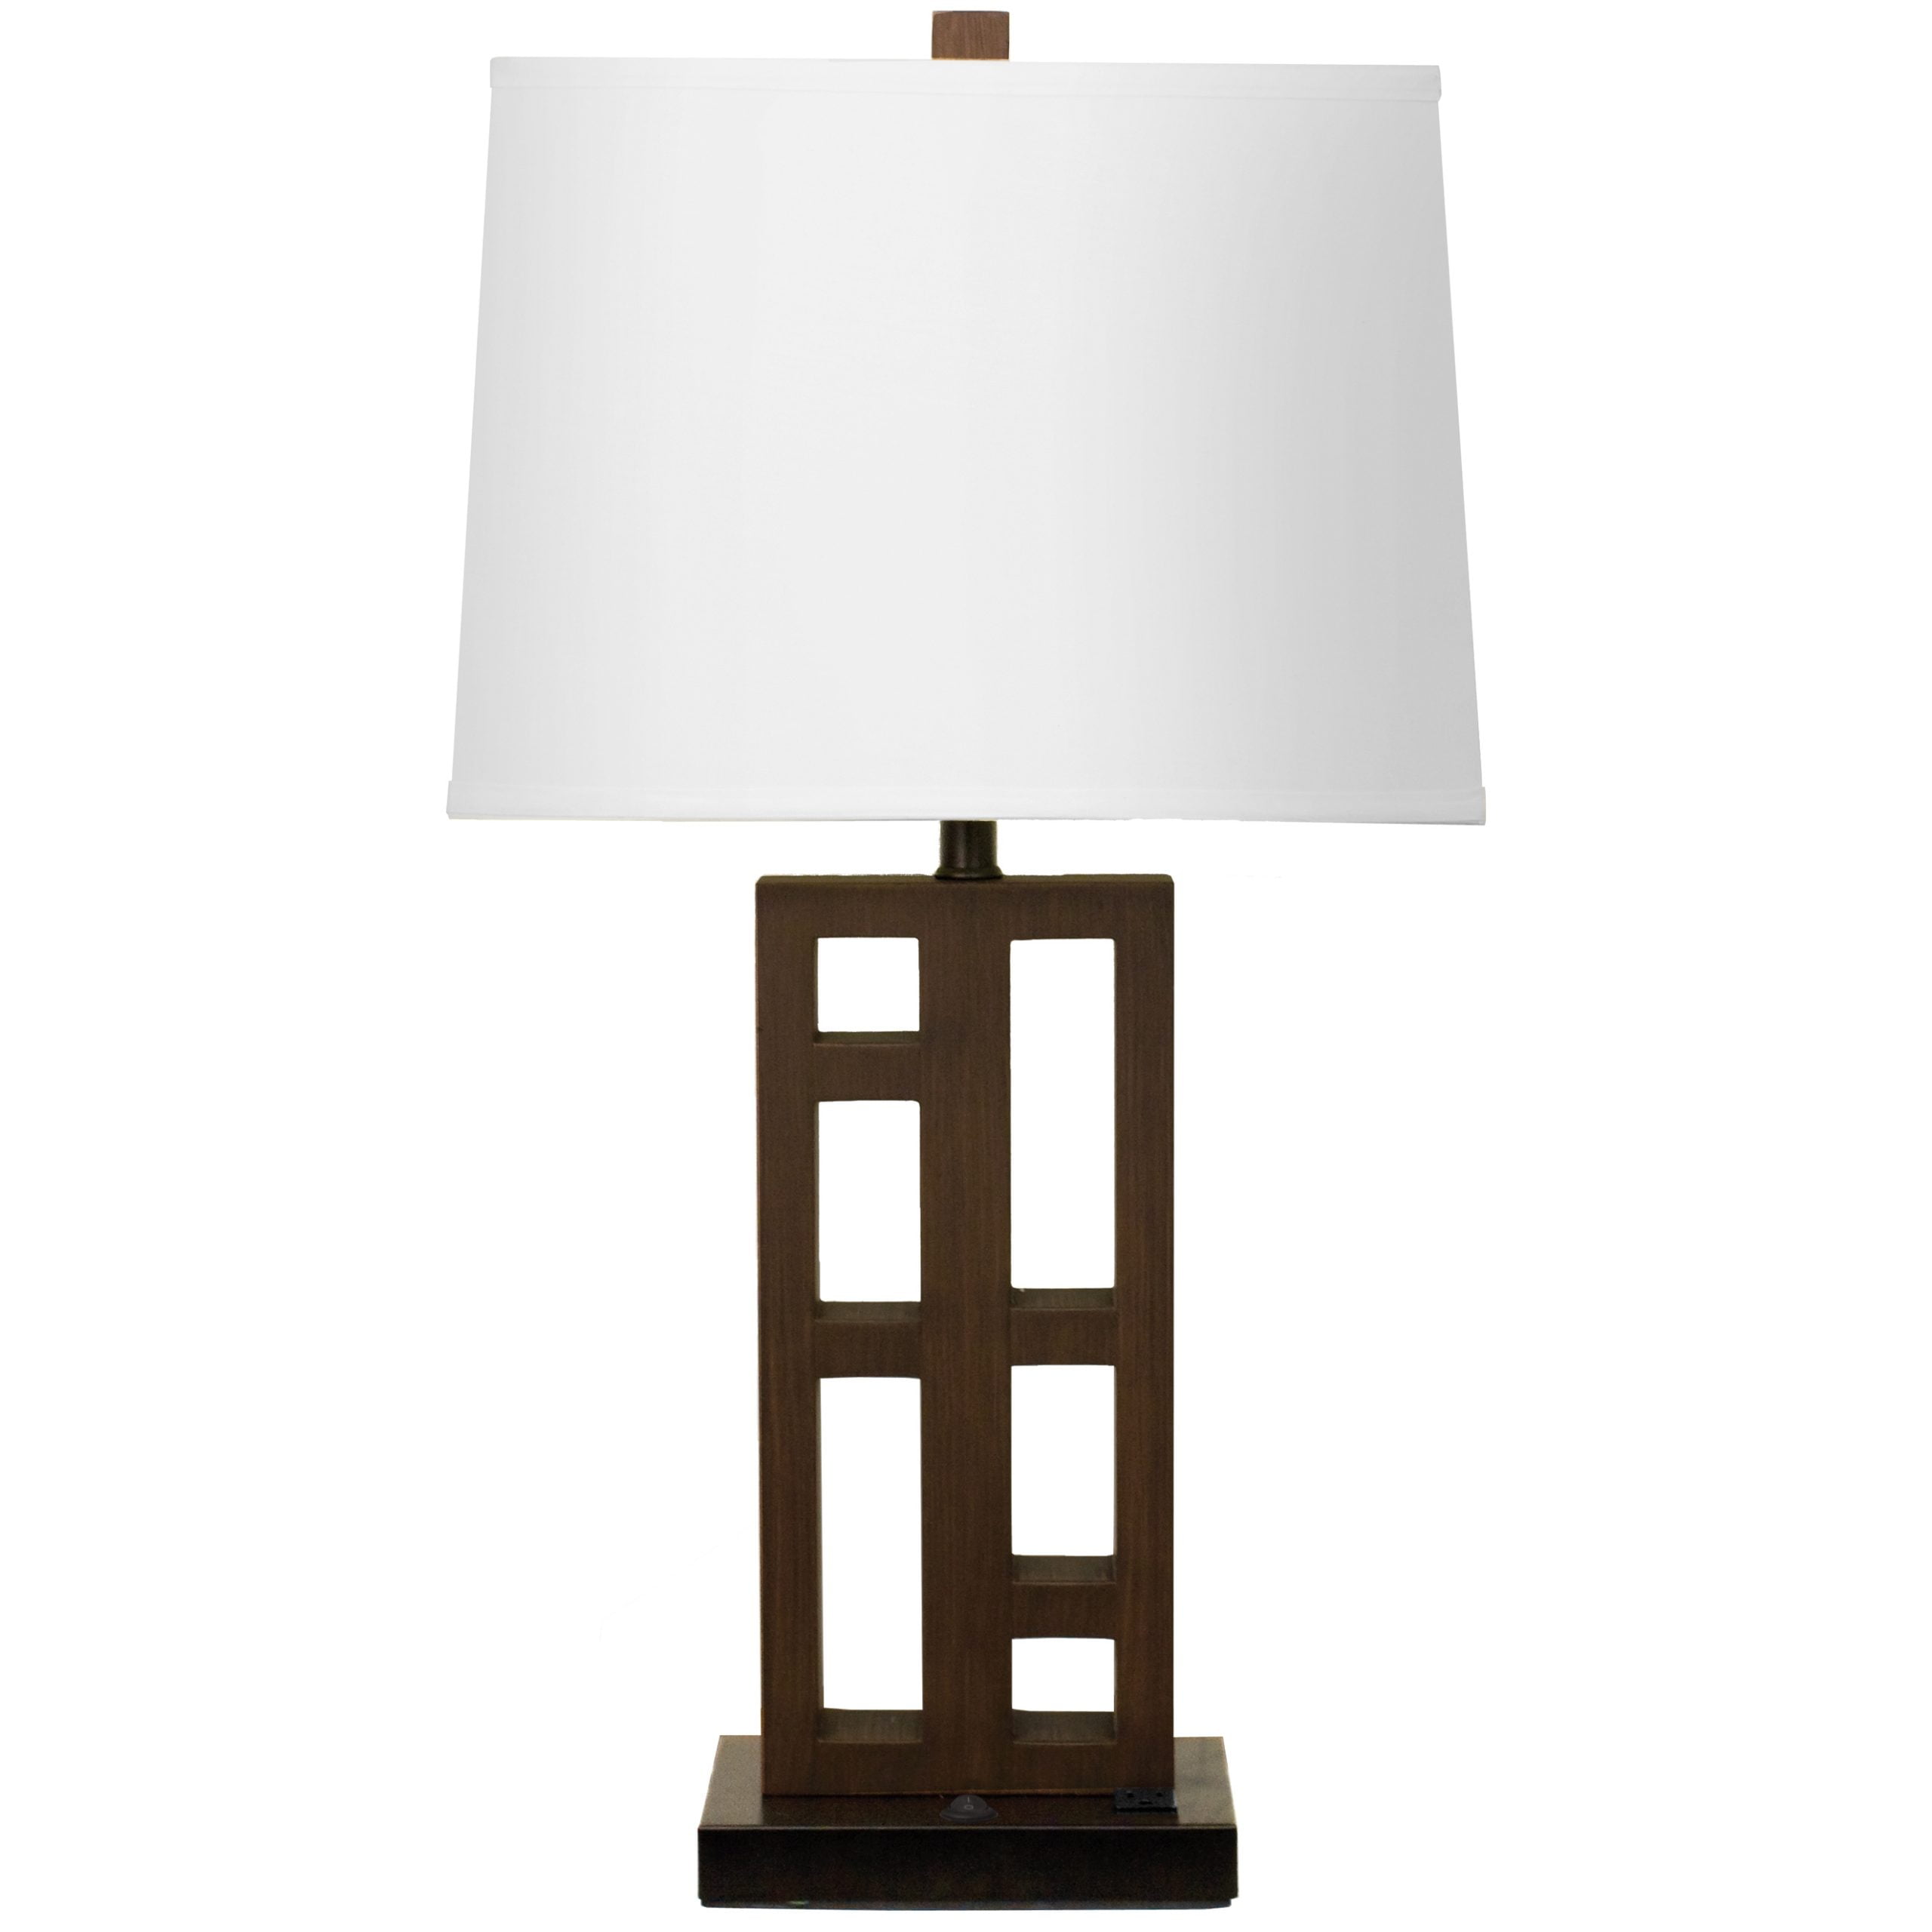 Urban Single Table Lamp with 1 Outlet